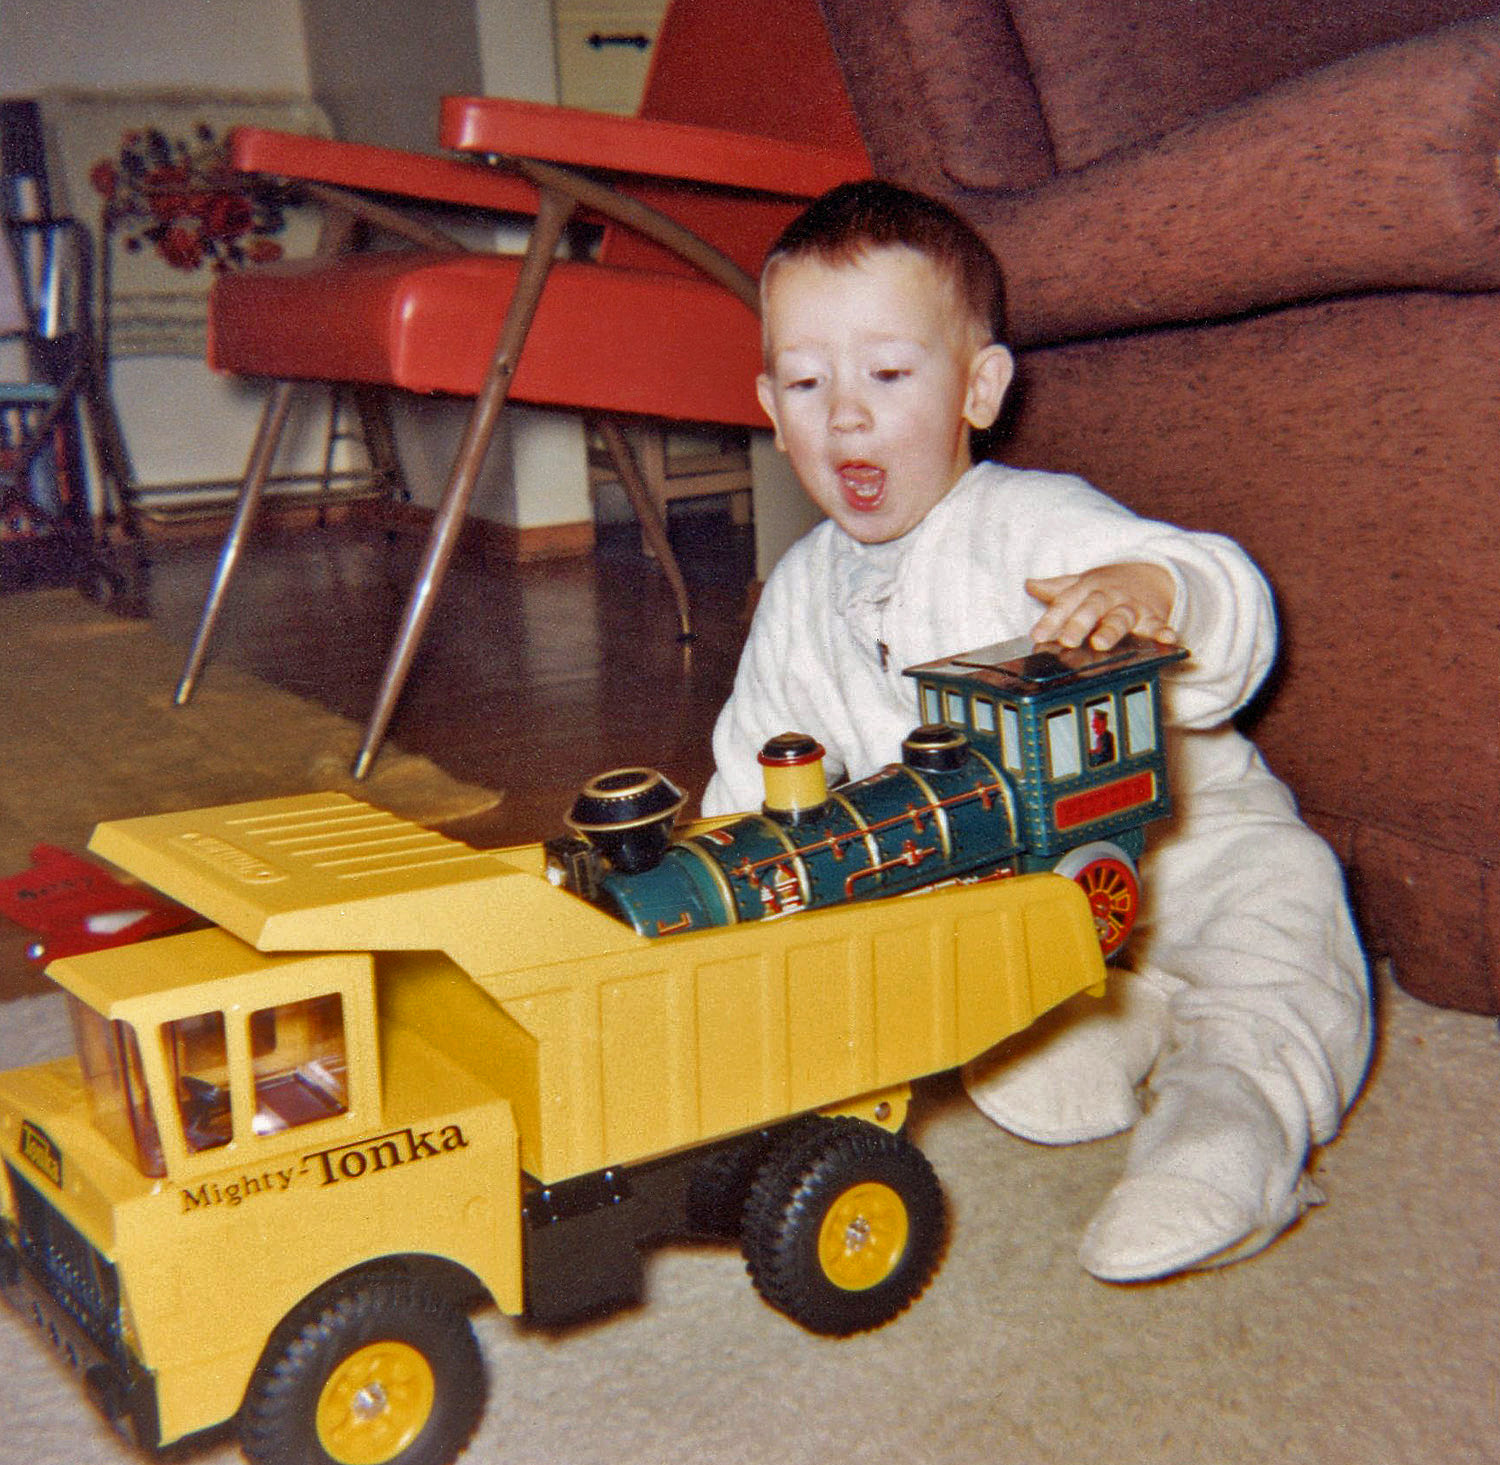 Here I am, Christmas 1964 with my new Tonka dump truck.  I vividly remember sitting in the dump bed and riding it down our sloped driveway, bending the bed sides outward. View full size.